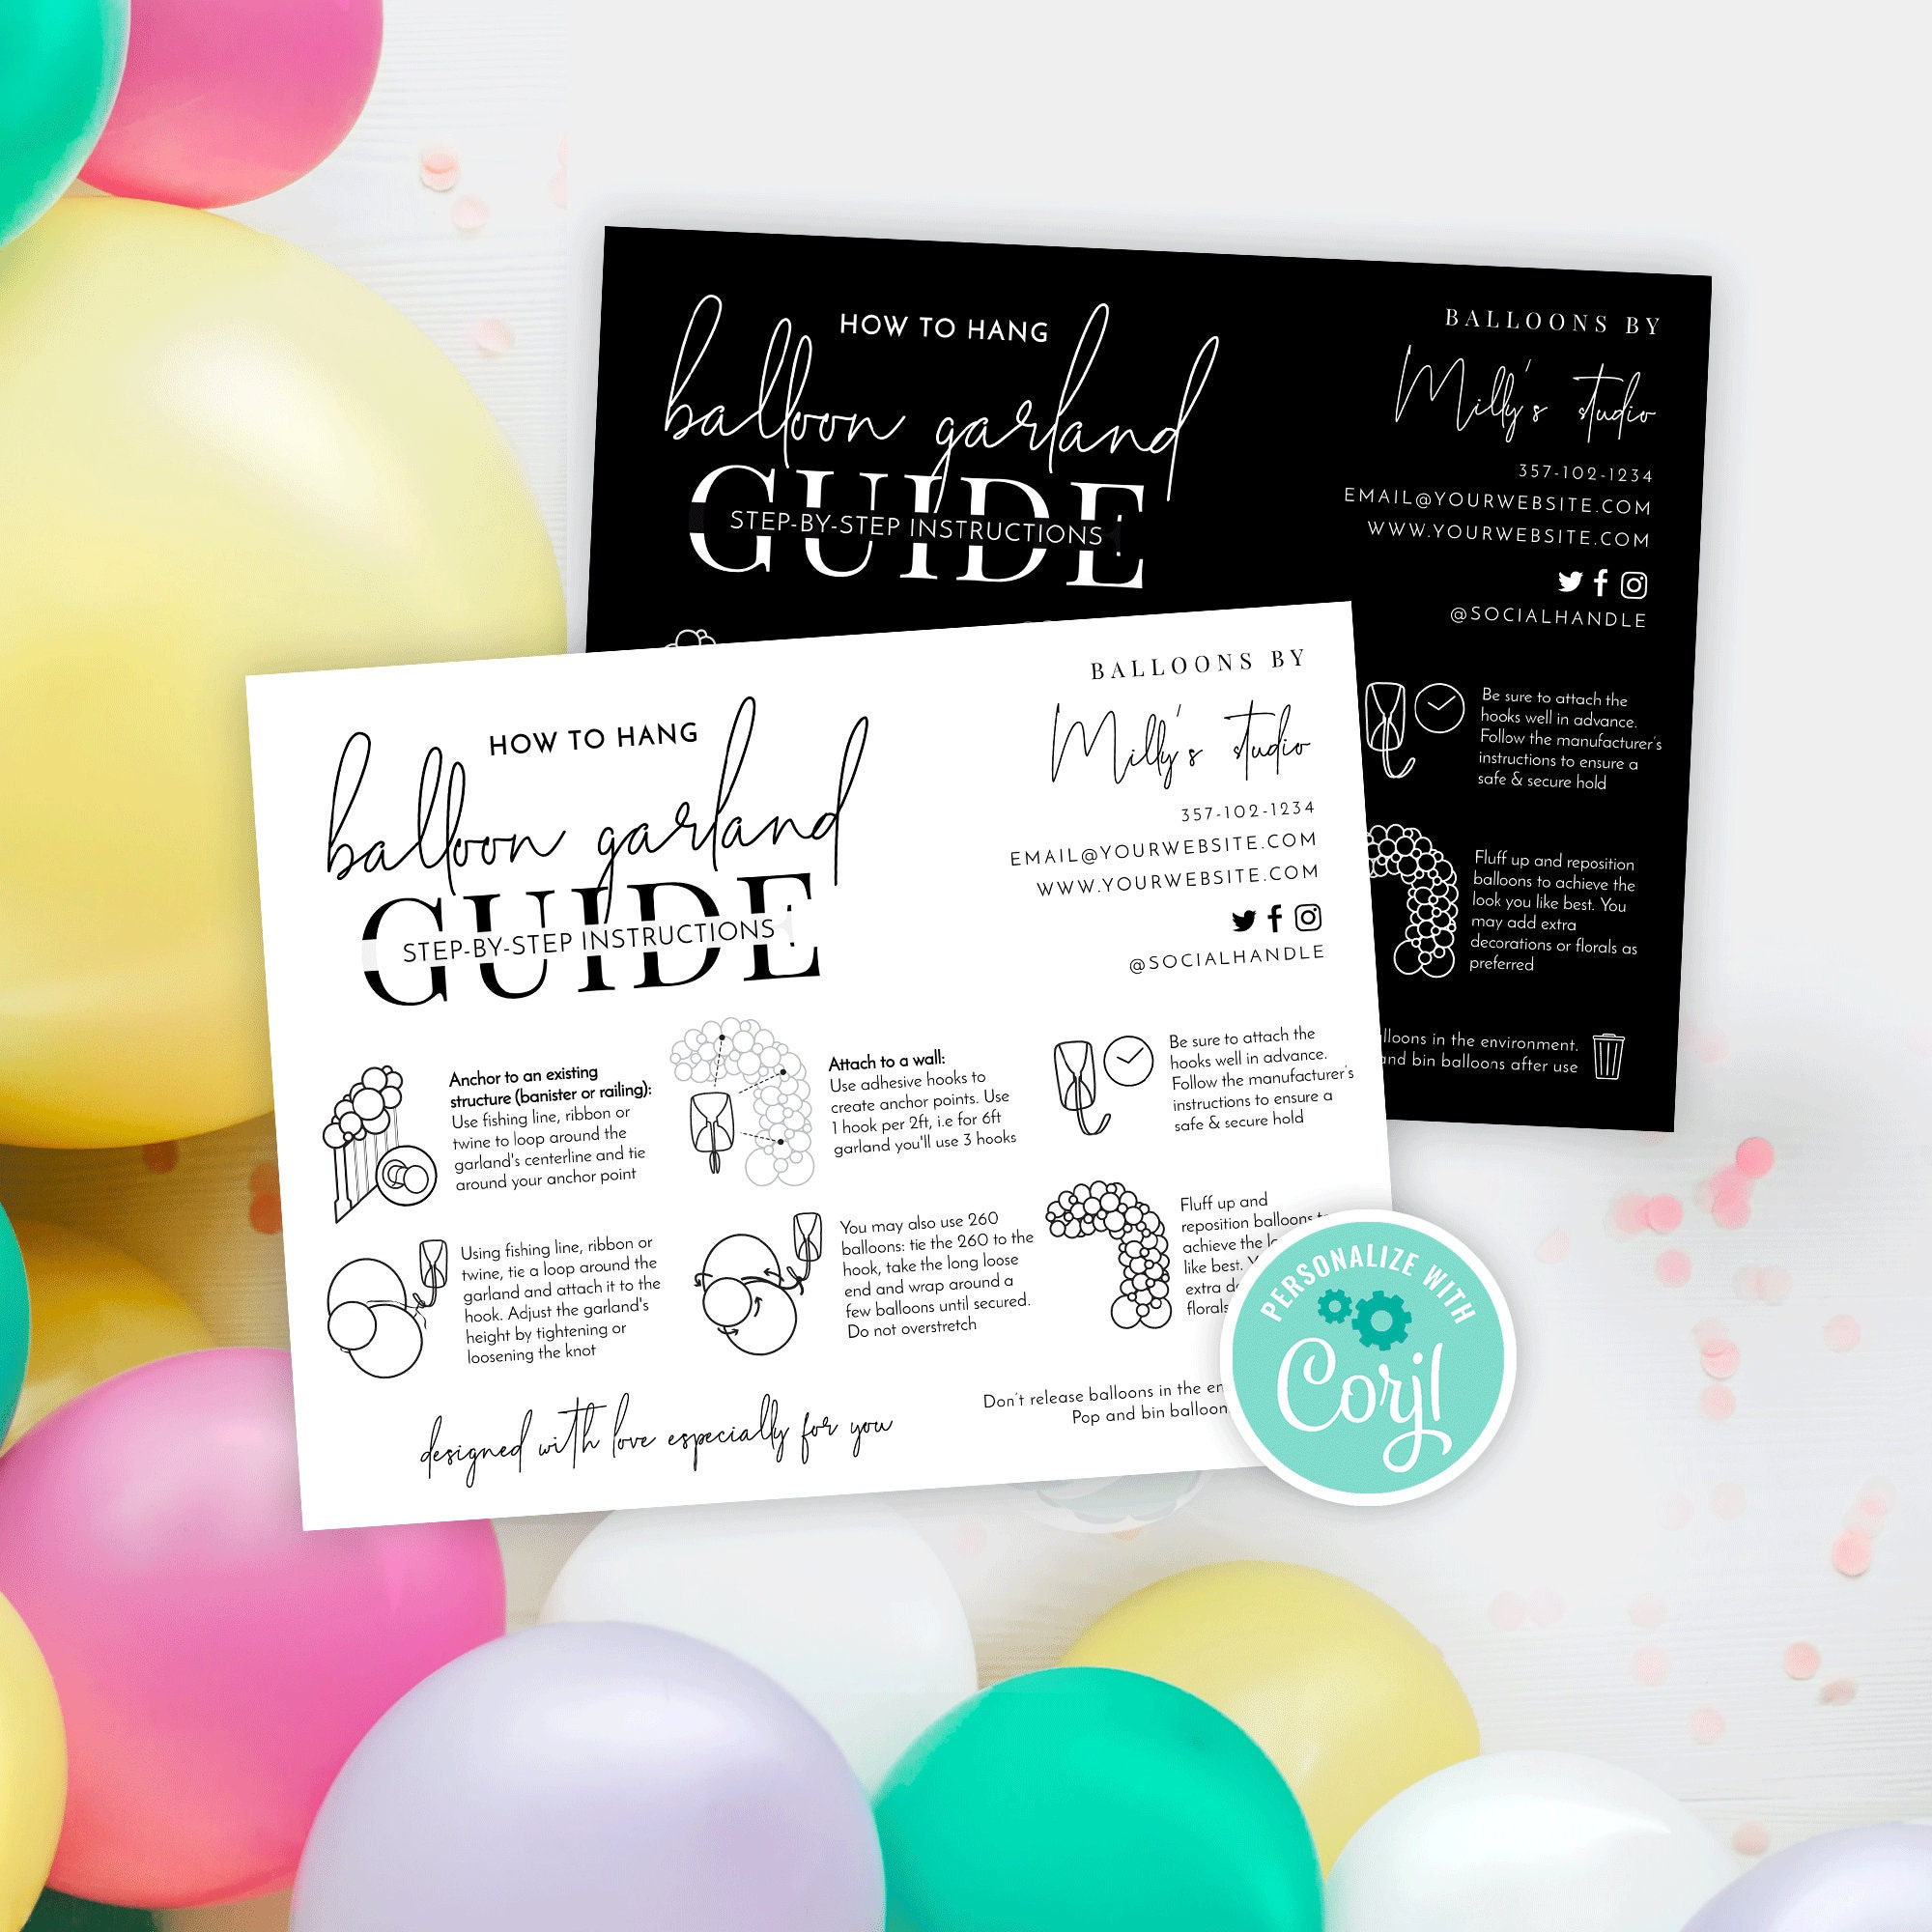 How to Balloon Garland Instructions Template, Minimalist Balloon Arch Wall  Mounting Guide, Printable Balloon Artist Care Cards, M-002 